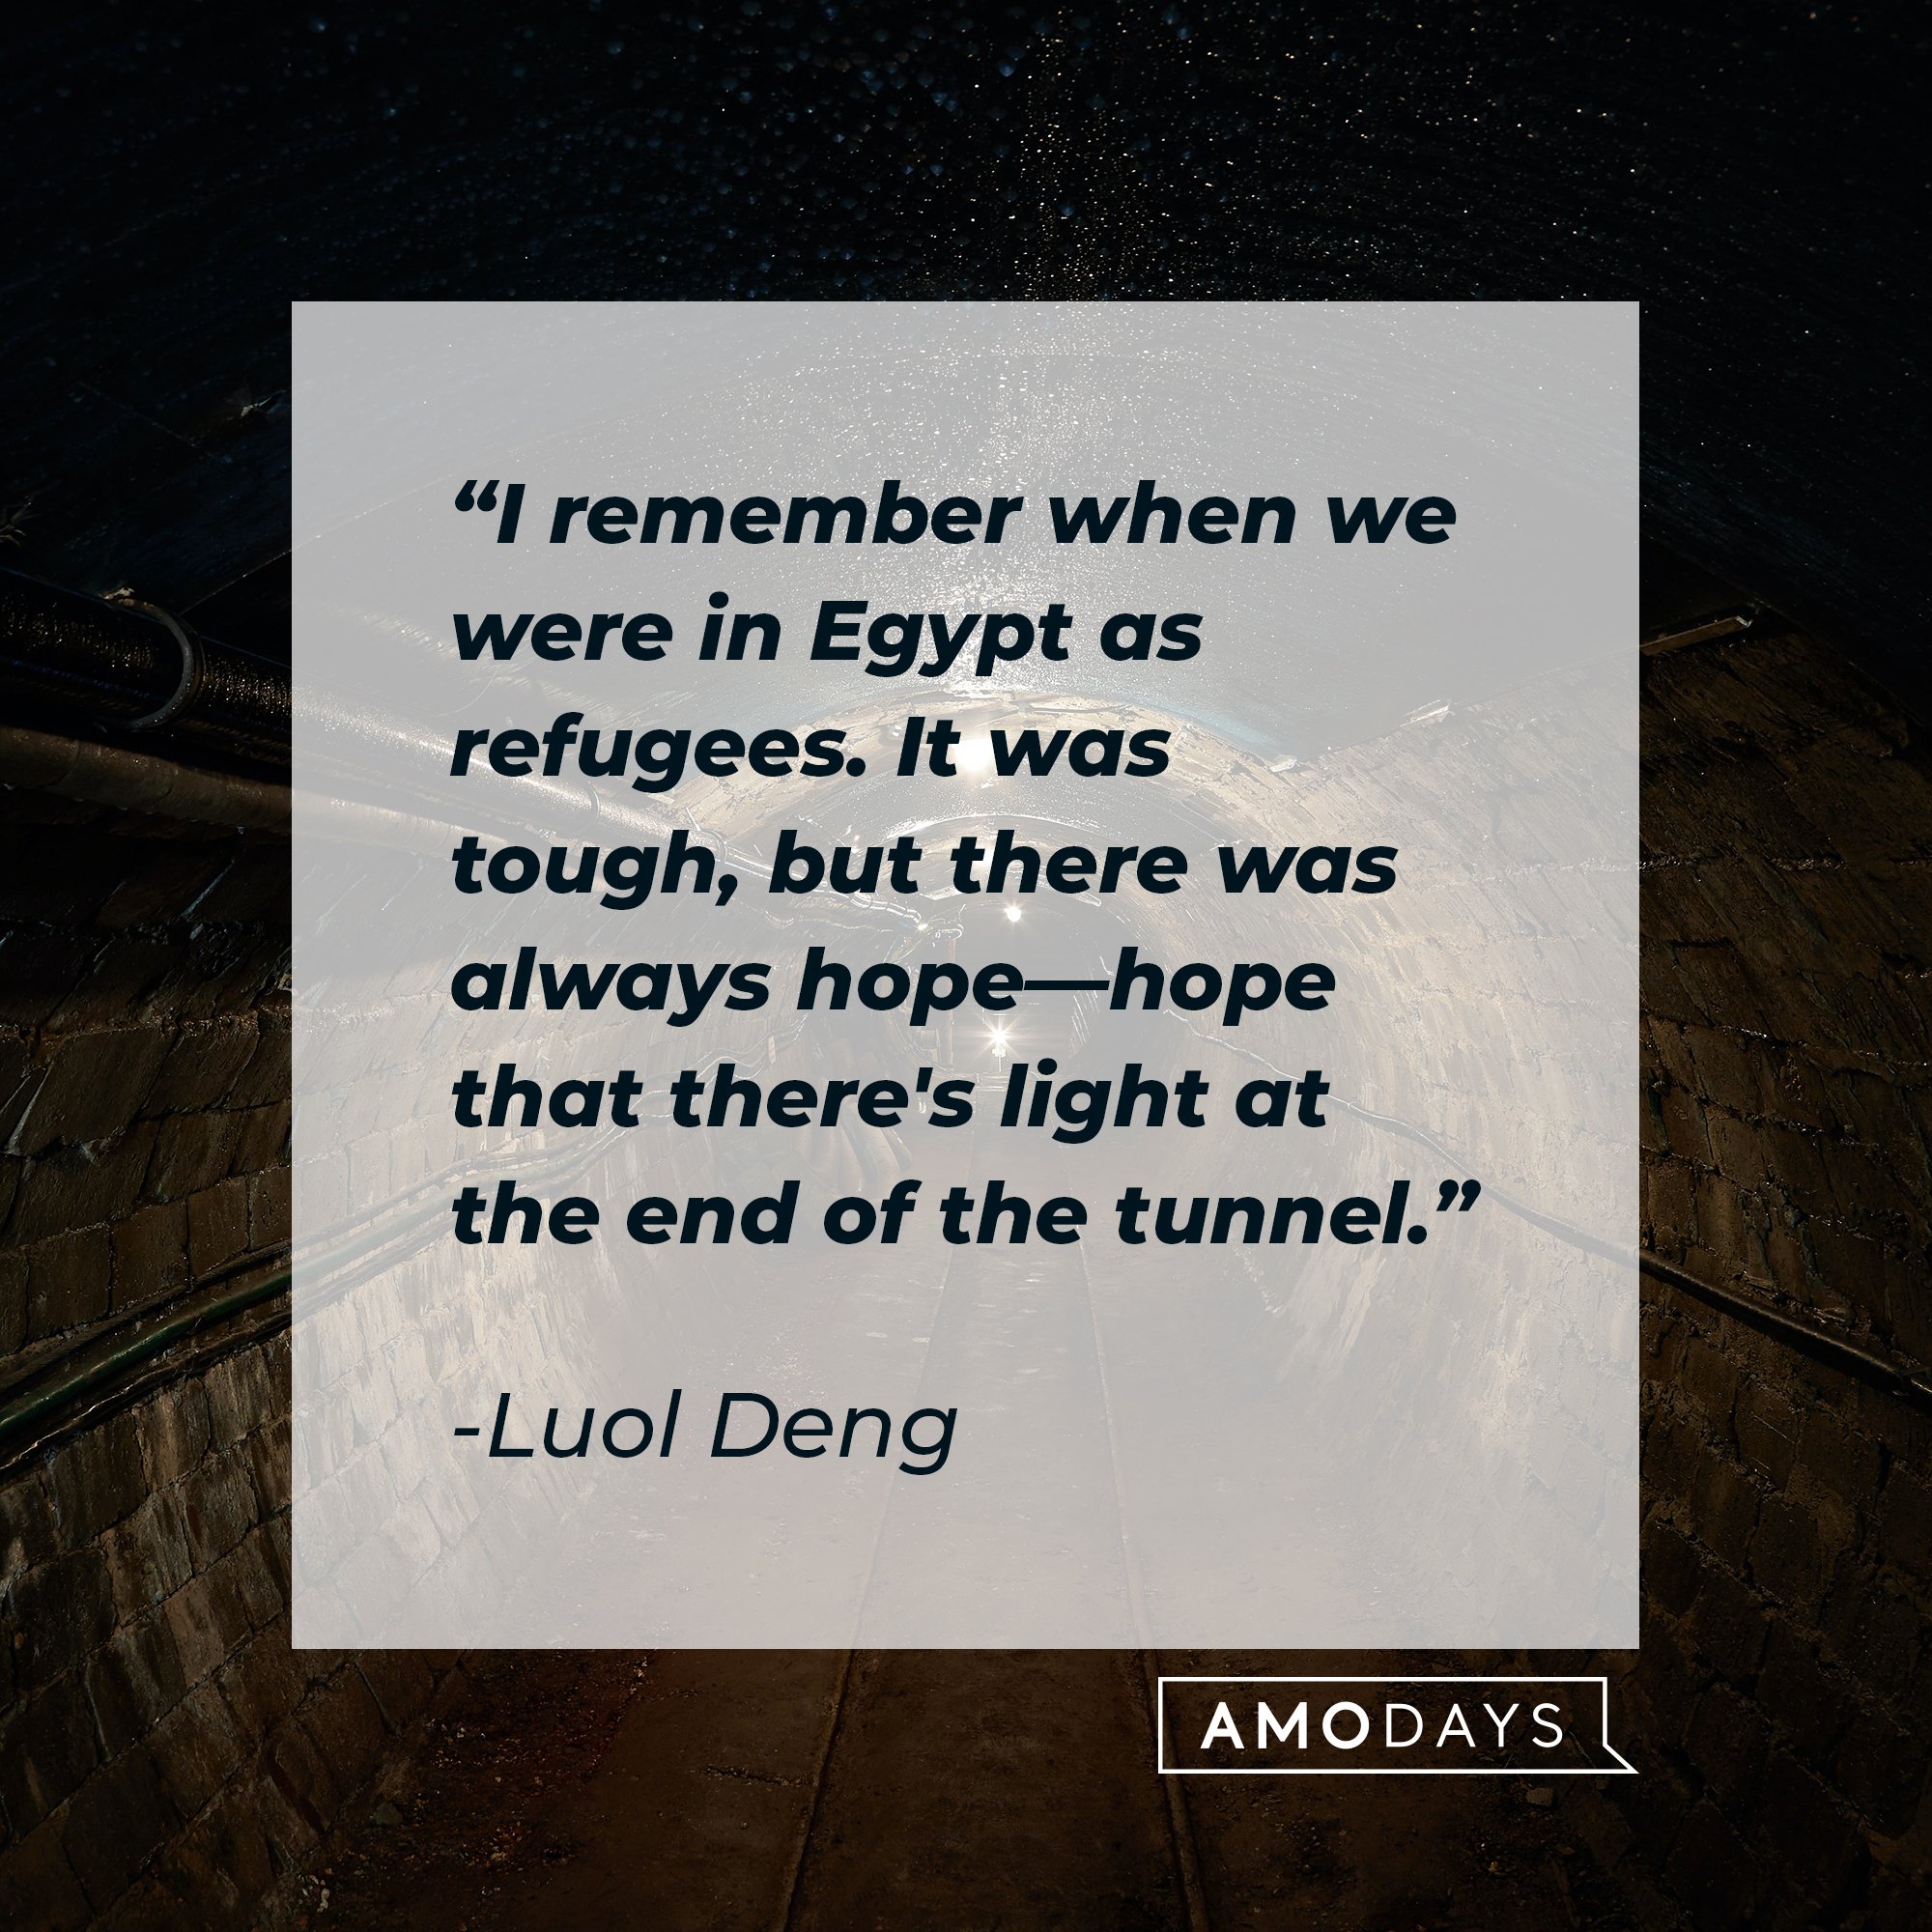 Luol Deng’s quote: "I remember when we were in Egypt as refugees. It was tough, but there was always hope―hope that there's light at the end of the tunnel." | Image: AmoDays